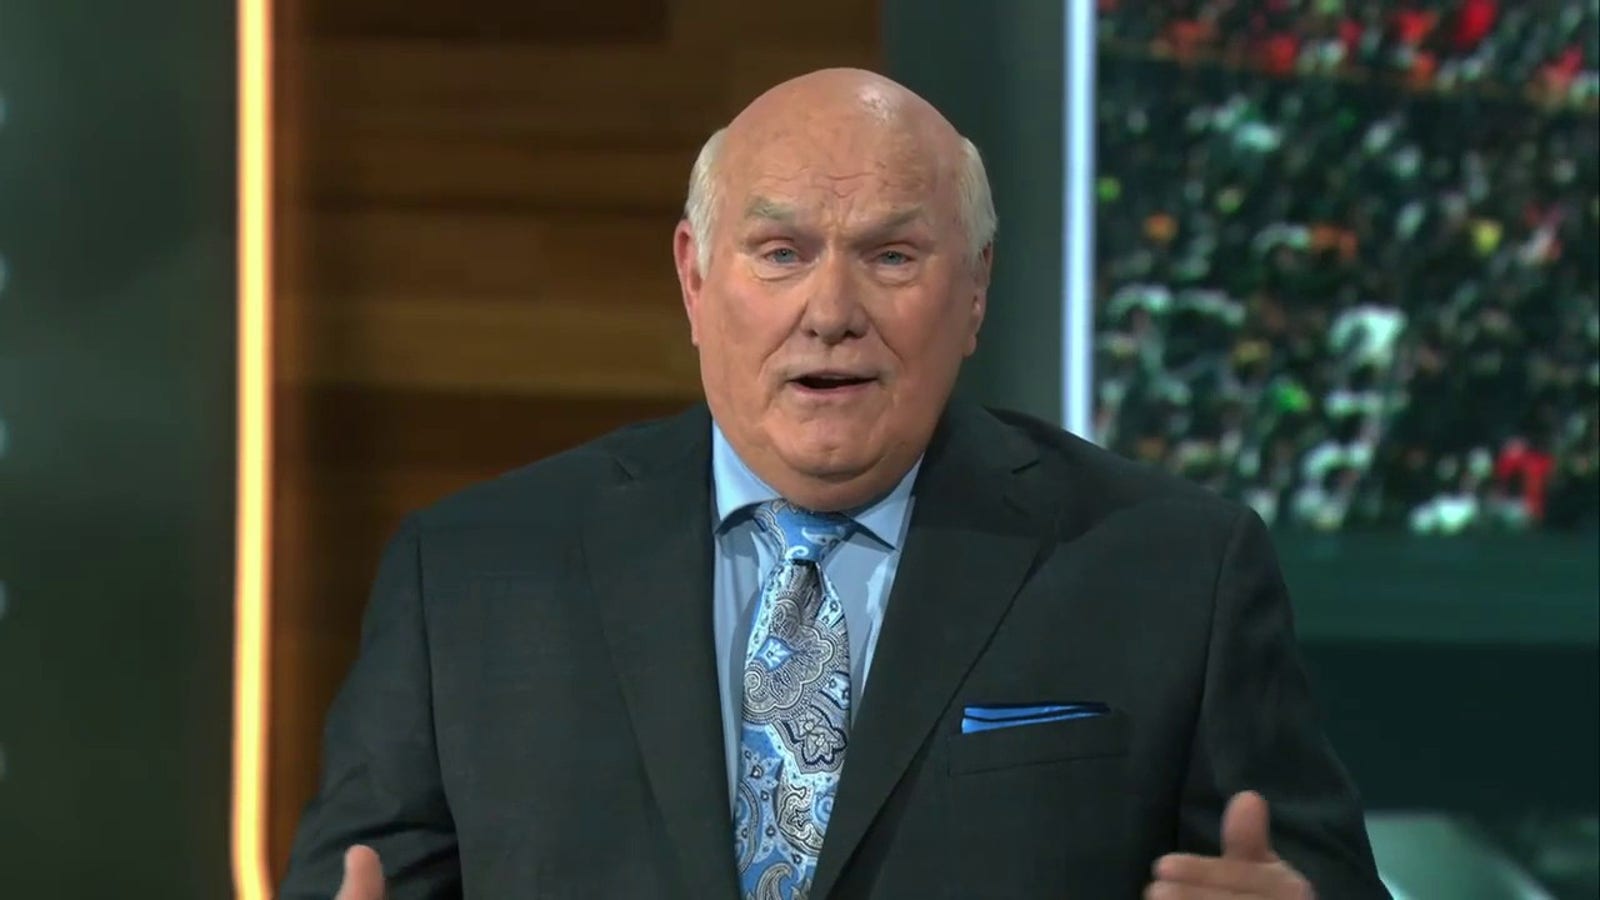 Terry Bradshaw says he's now cancer free